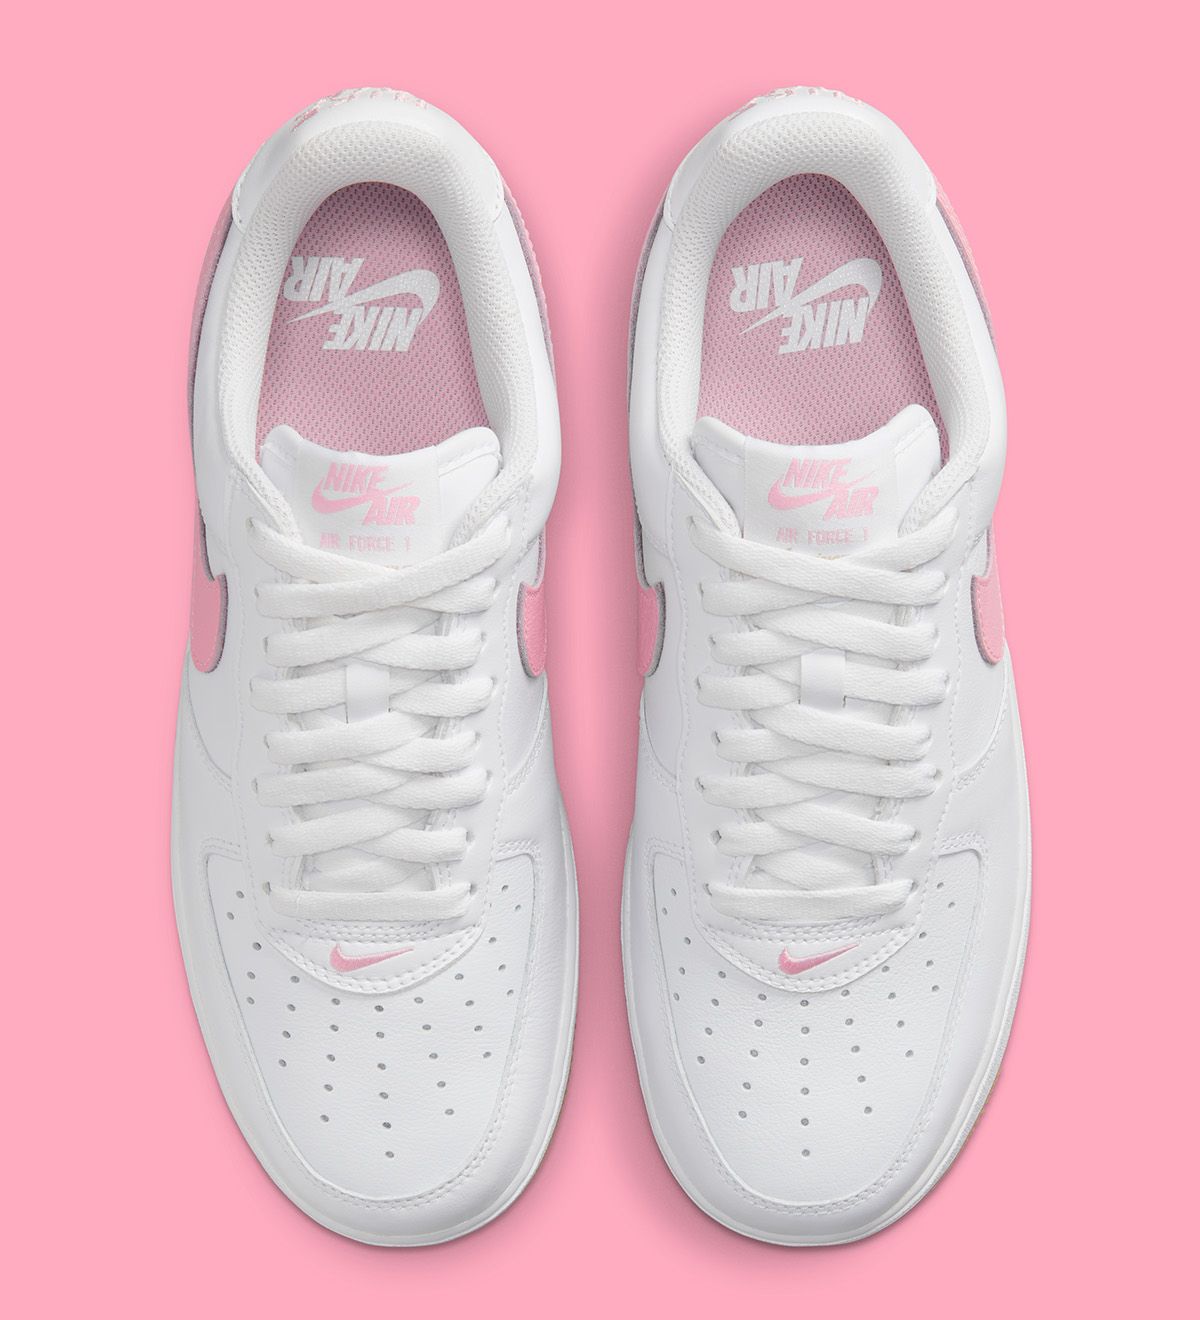 Where air force 1 special edition to Buy the Nike Air Force 1 Low "Since '82" in Pink and Gum